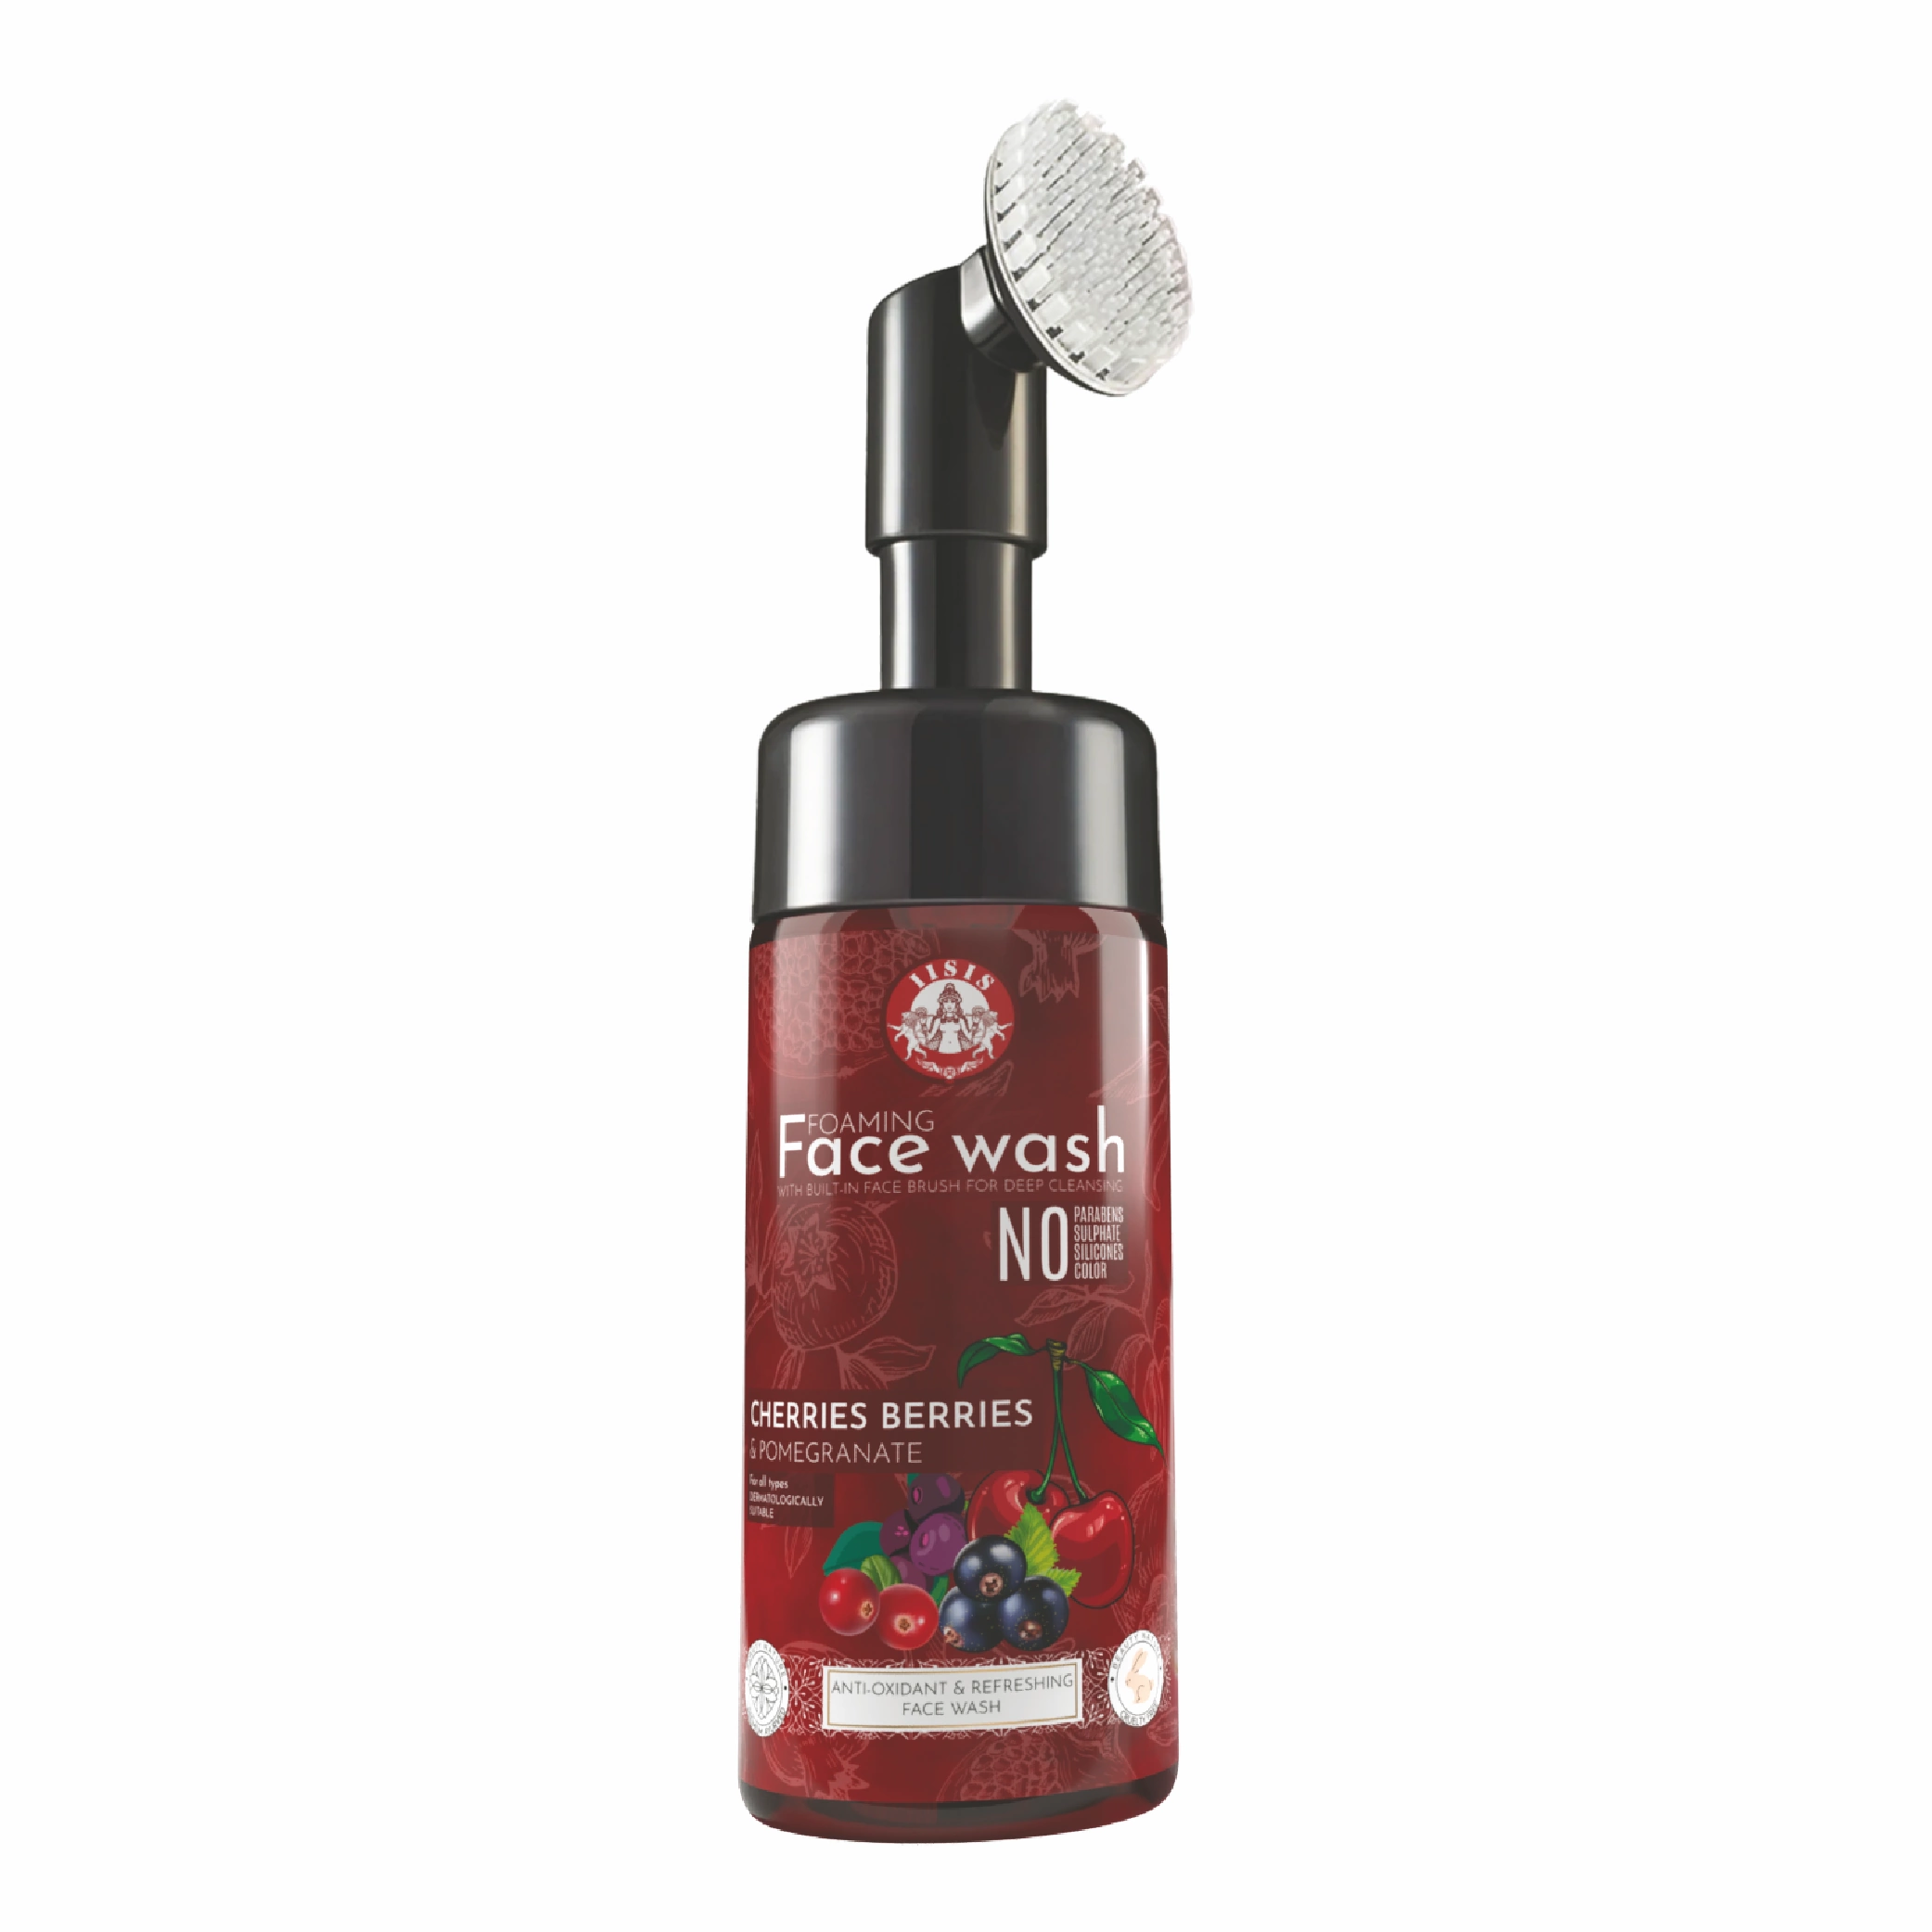 Cherries Berries & Pomegranate Foaming Face Wash With Built-In Face Brush (150ml)